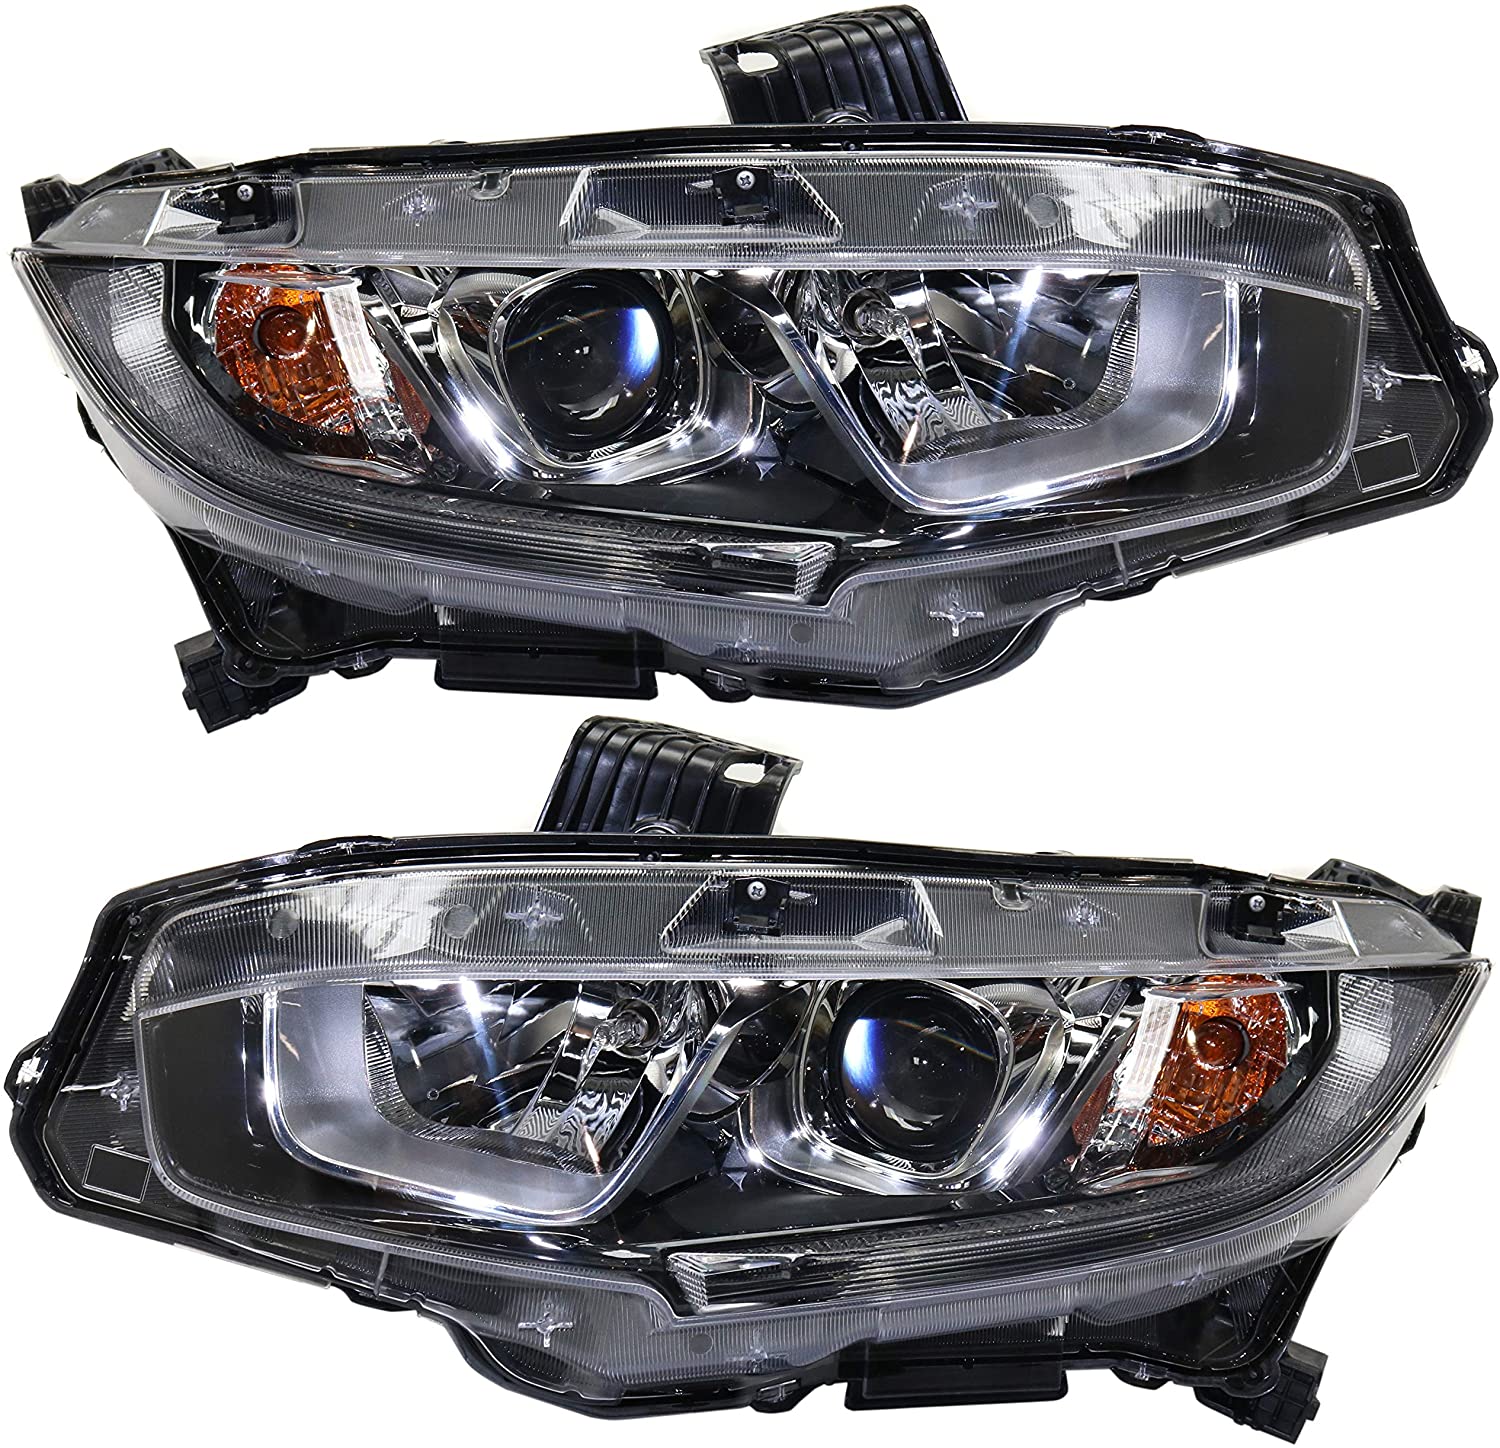 Head Lamp Compatible with HONDA Civic 2016-2018 Right Side and Left Side Assembly Halogen Coupe/CAPA